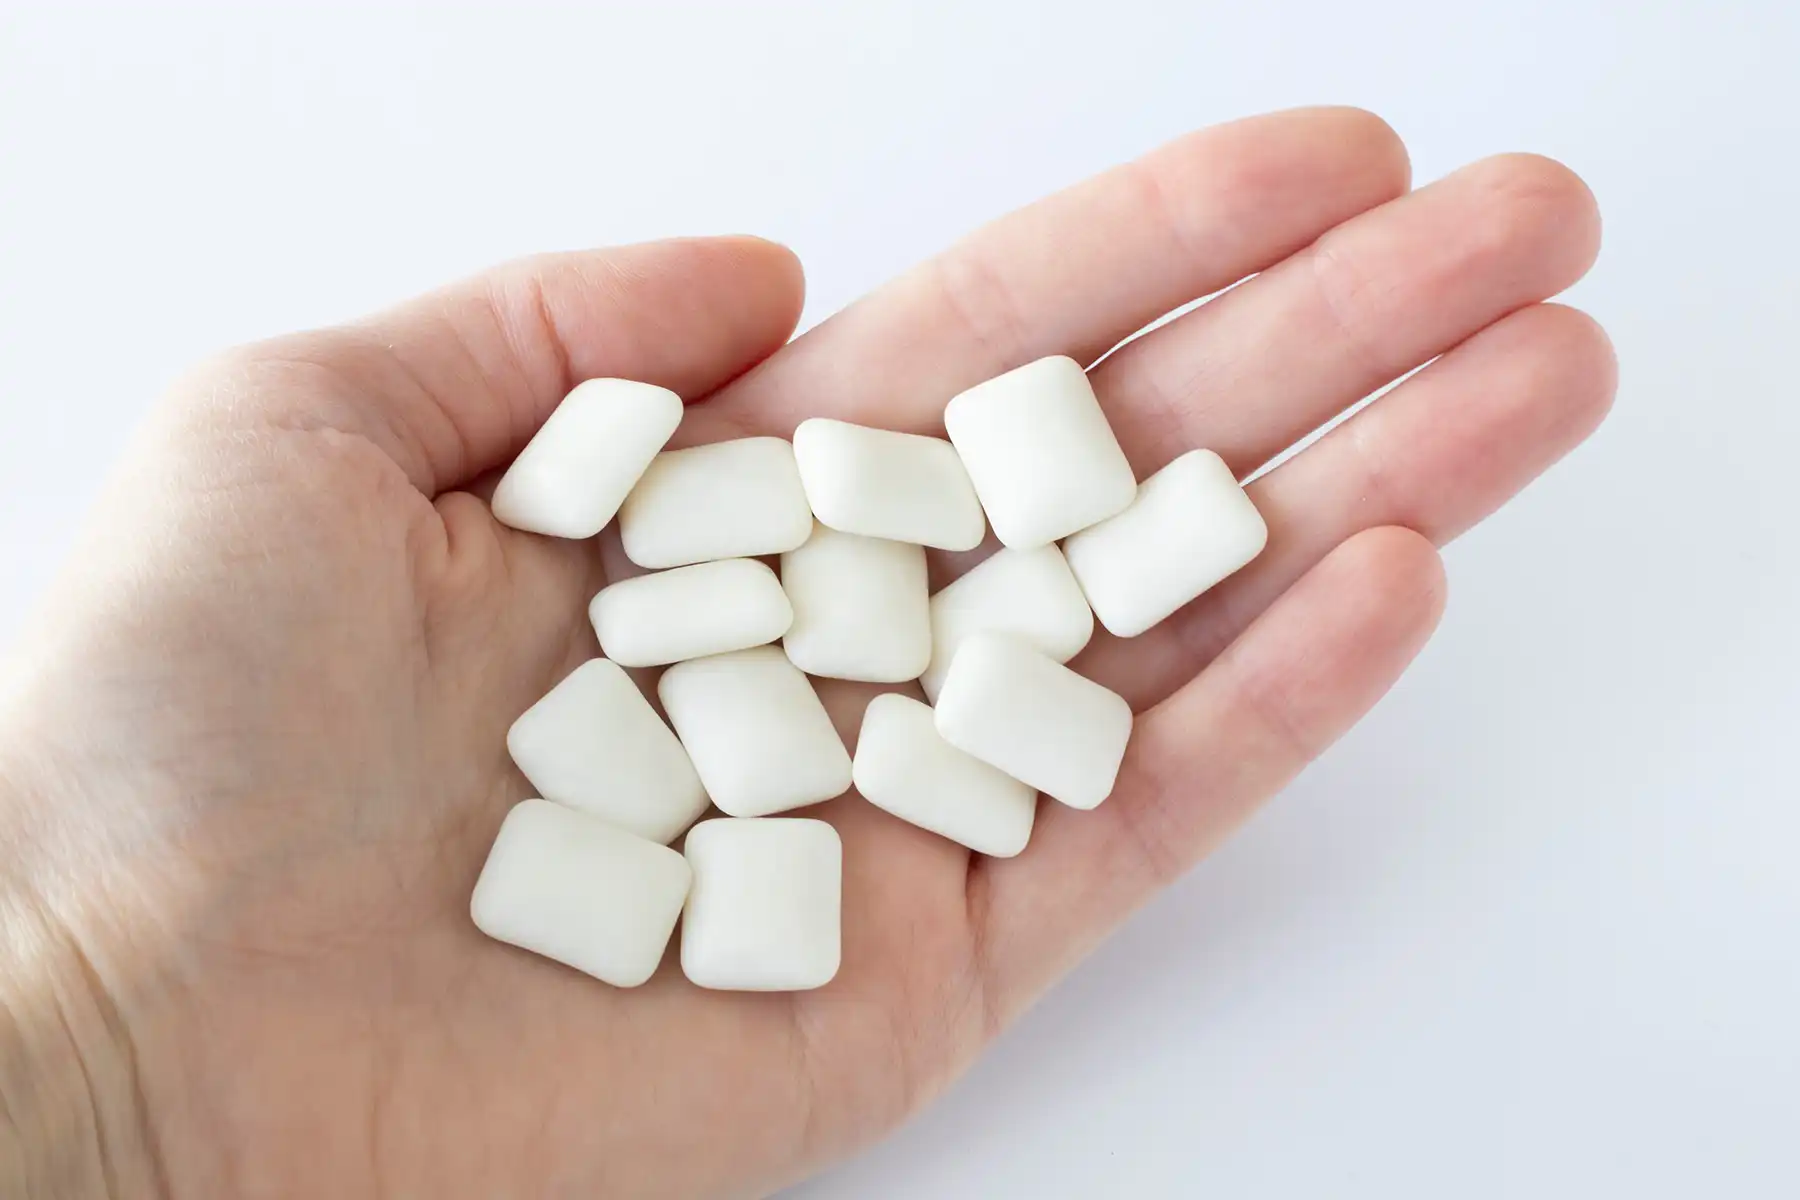 Chewing gum tablets (with xylitol as a sweetener( in someone's hand.